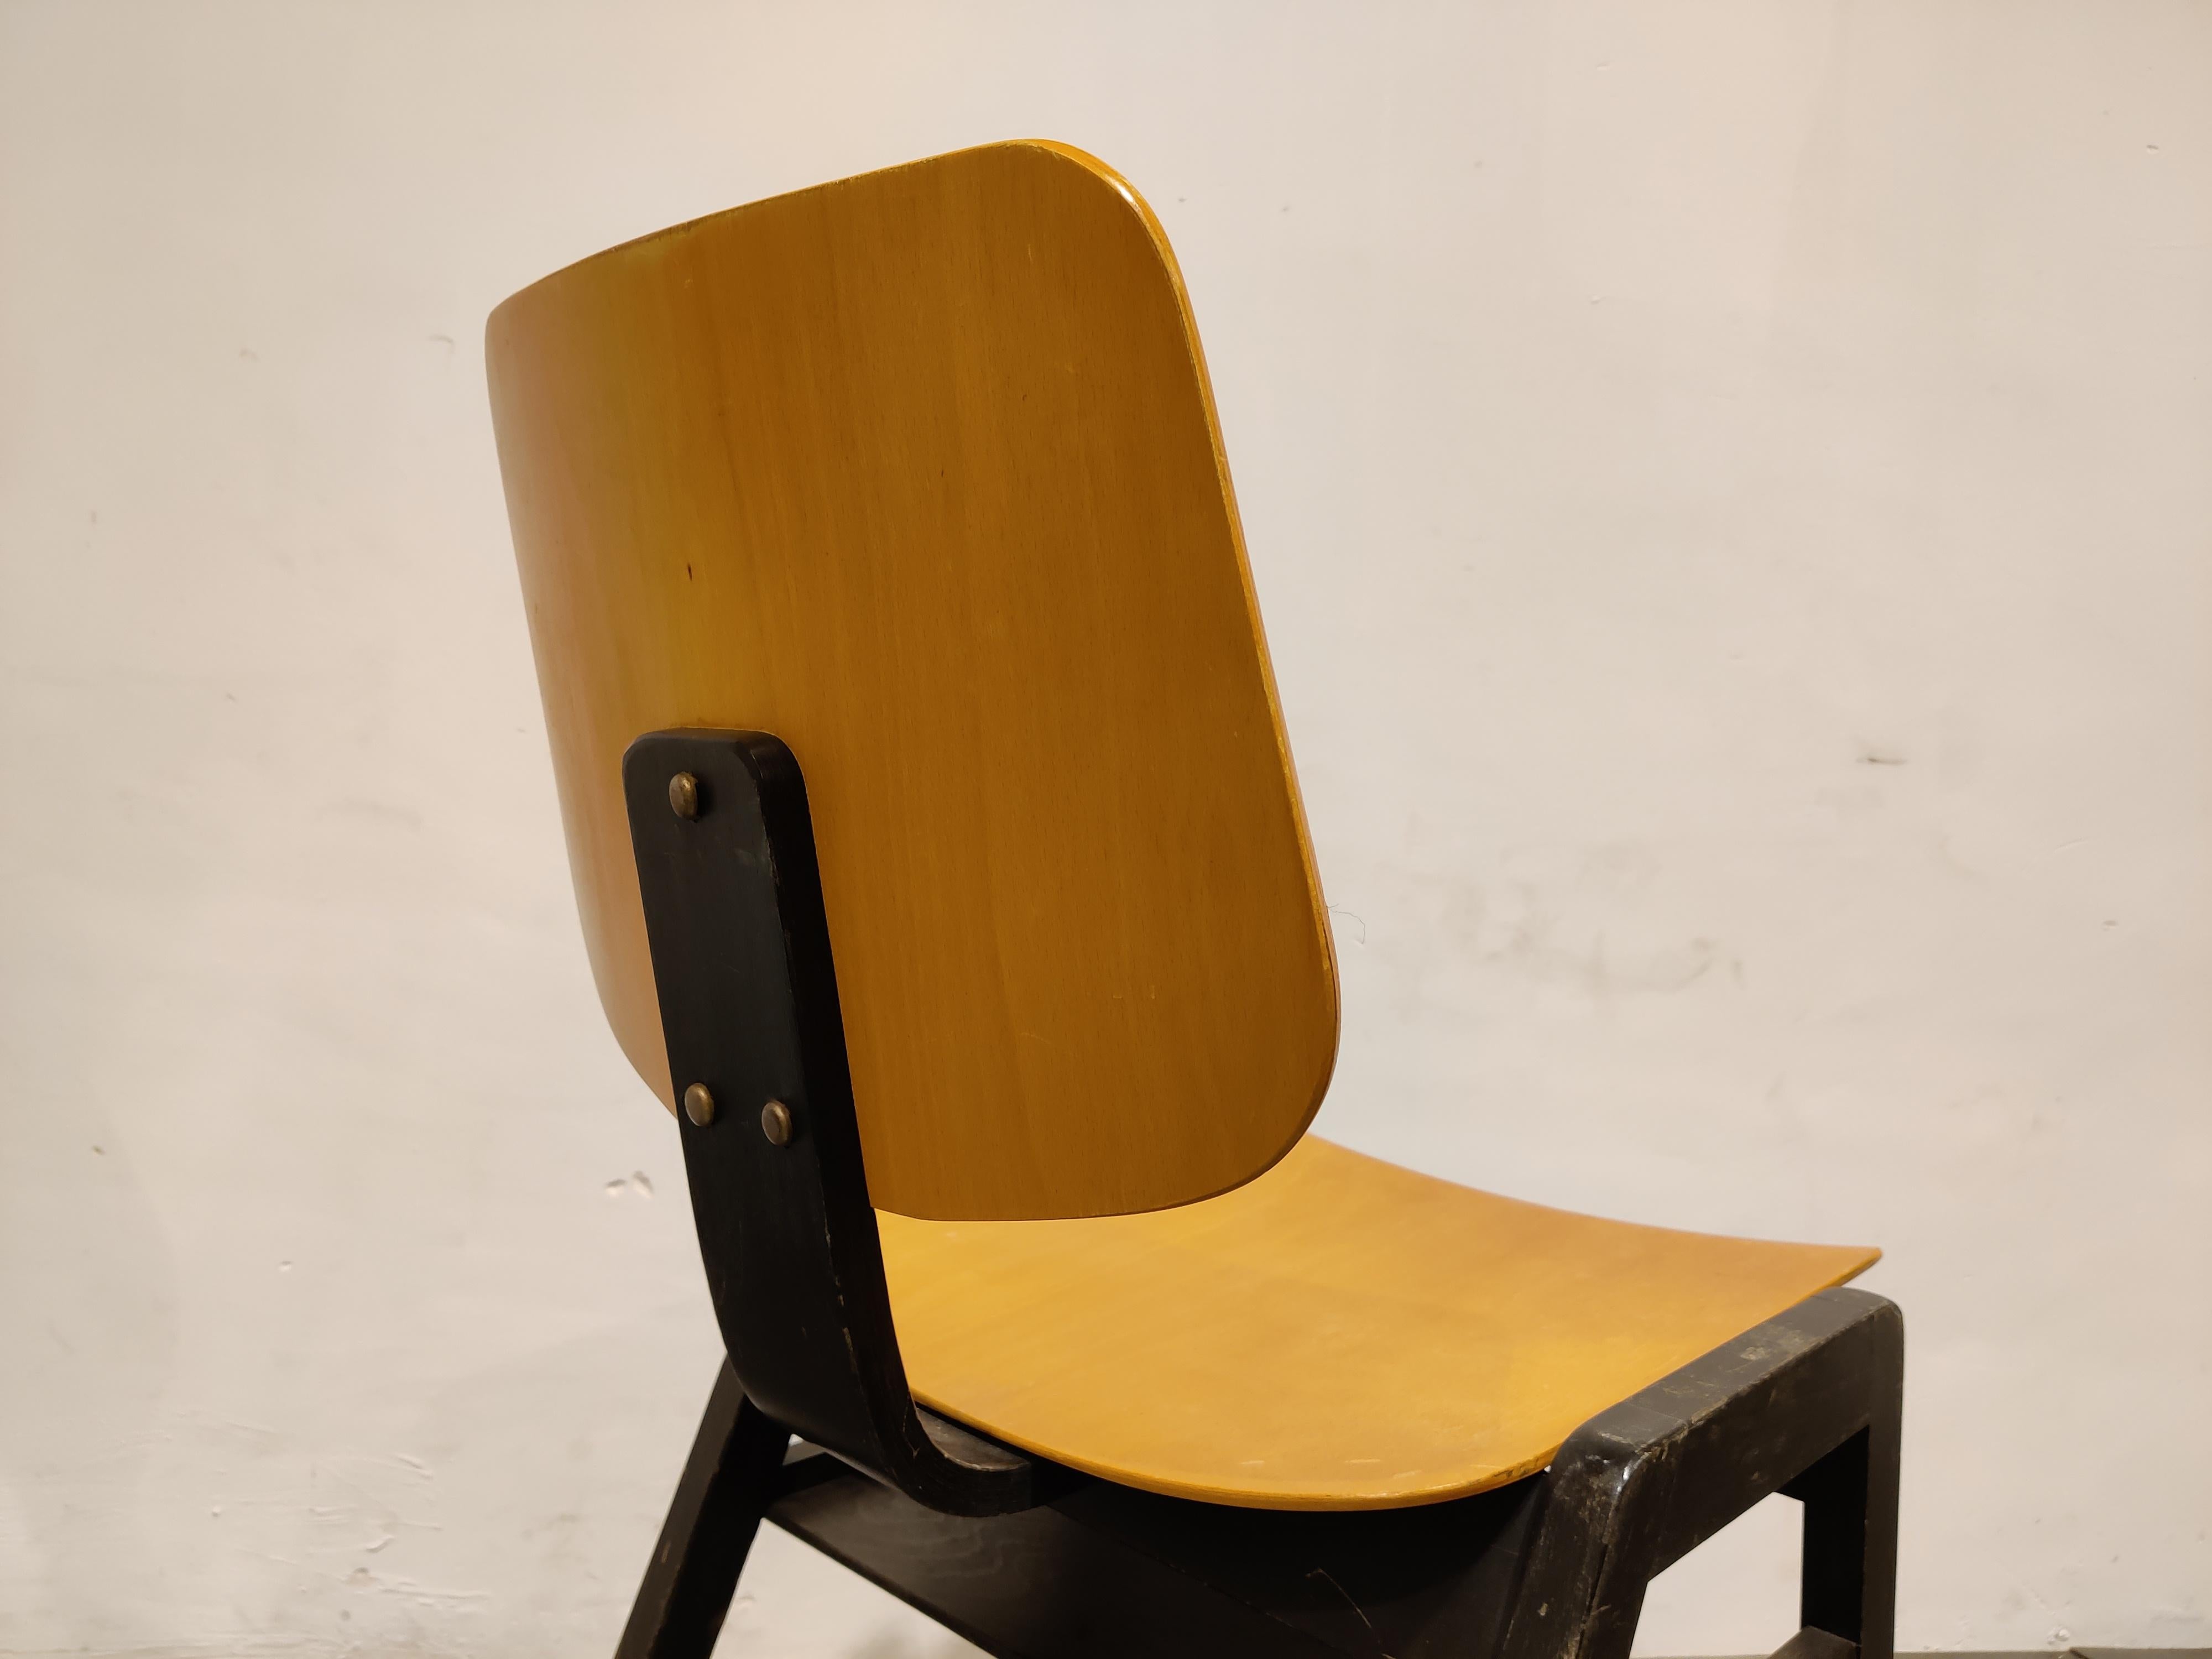 Vintage stackable plywood school chairs.

Plywood seat and backrest and black painted wooden frame.

Sturdy chairs with nice patina.

9 pieces avilable, price is per piece.

1970s - Germany

Dimensions
Height: 83cm/32.67